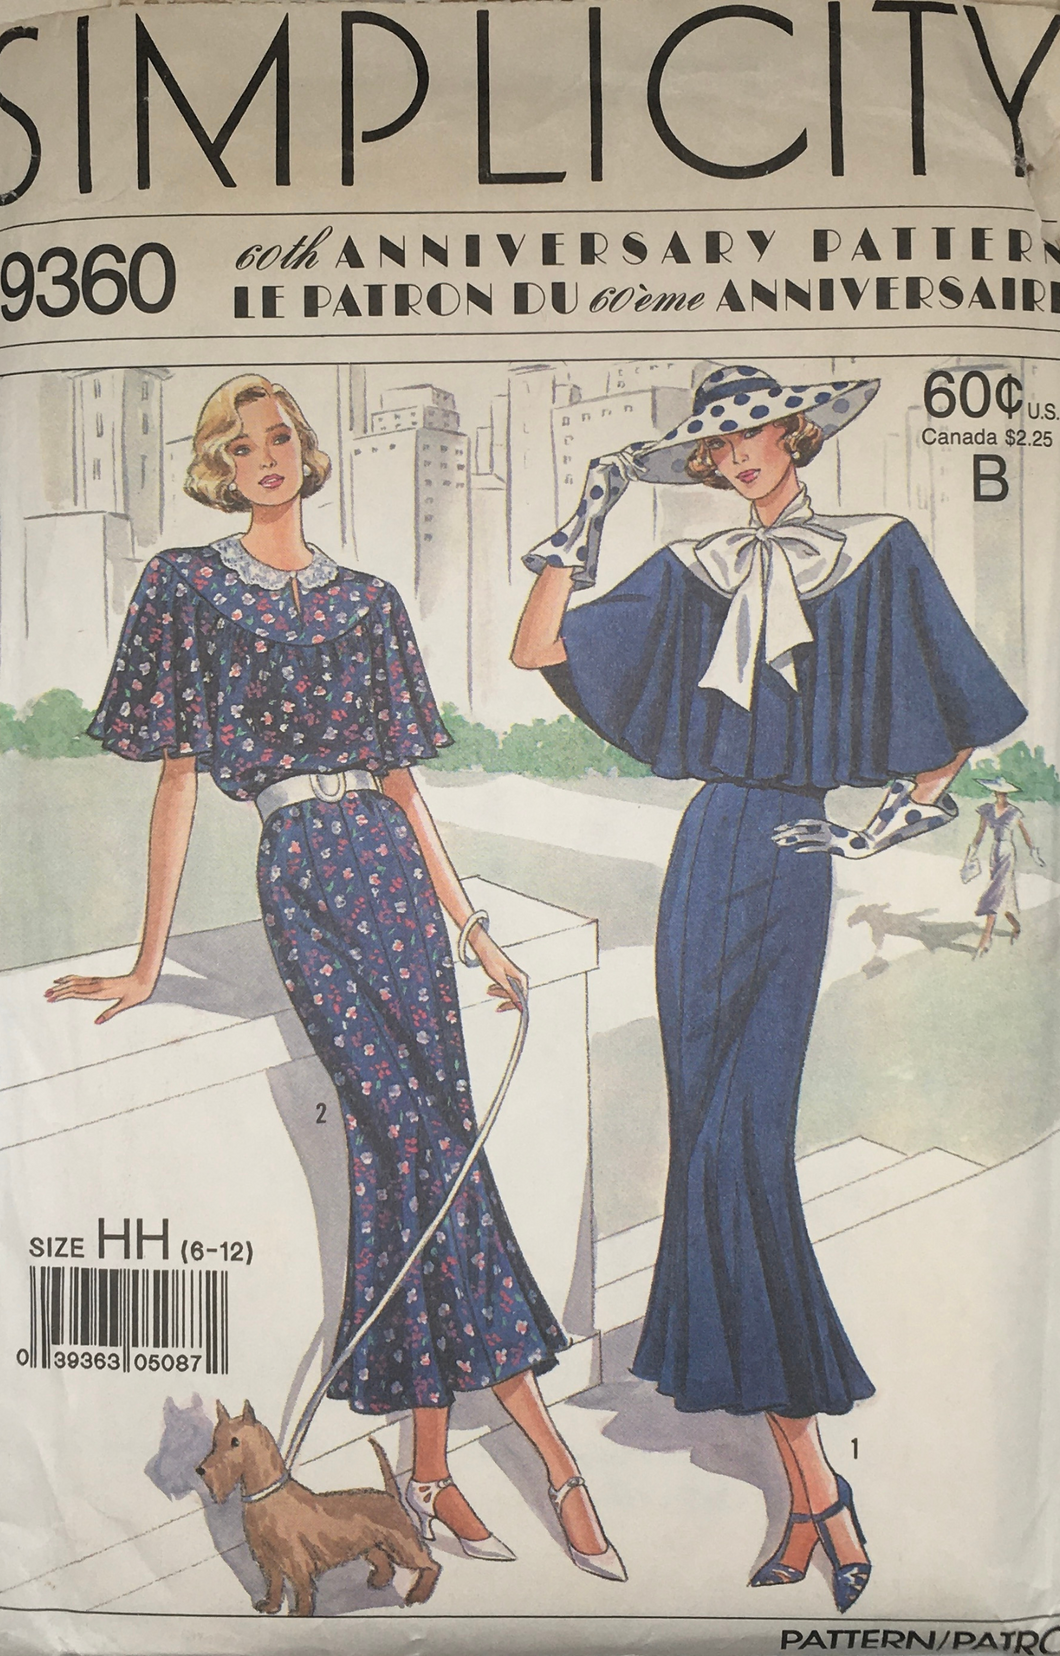 1928 Reproduction Sewing Pattern: Simplicity 9360